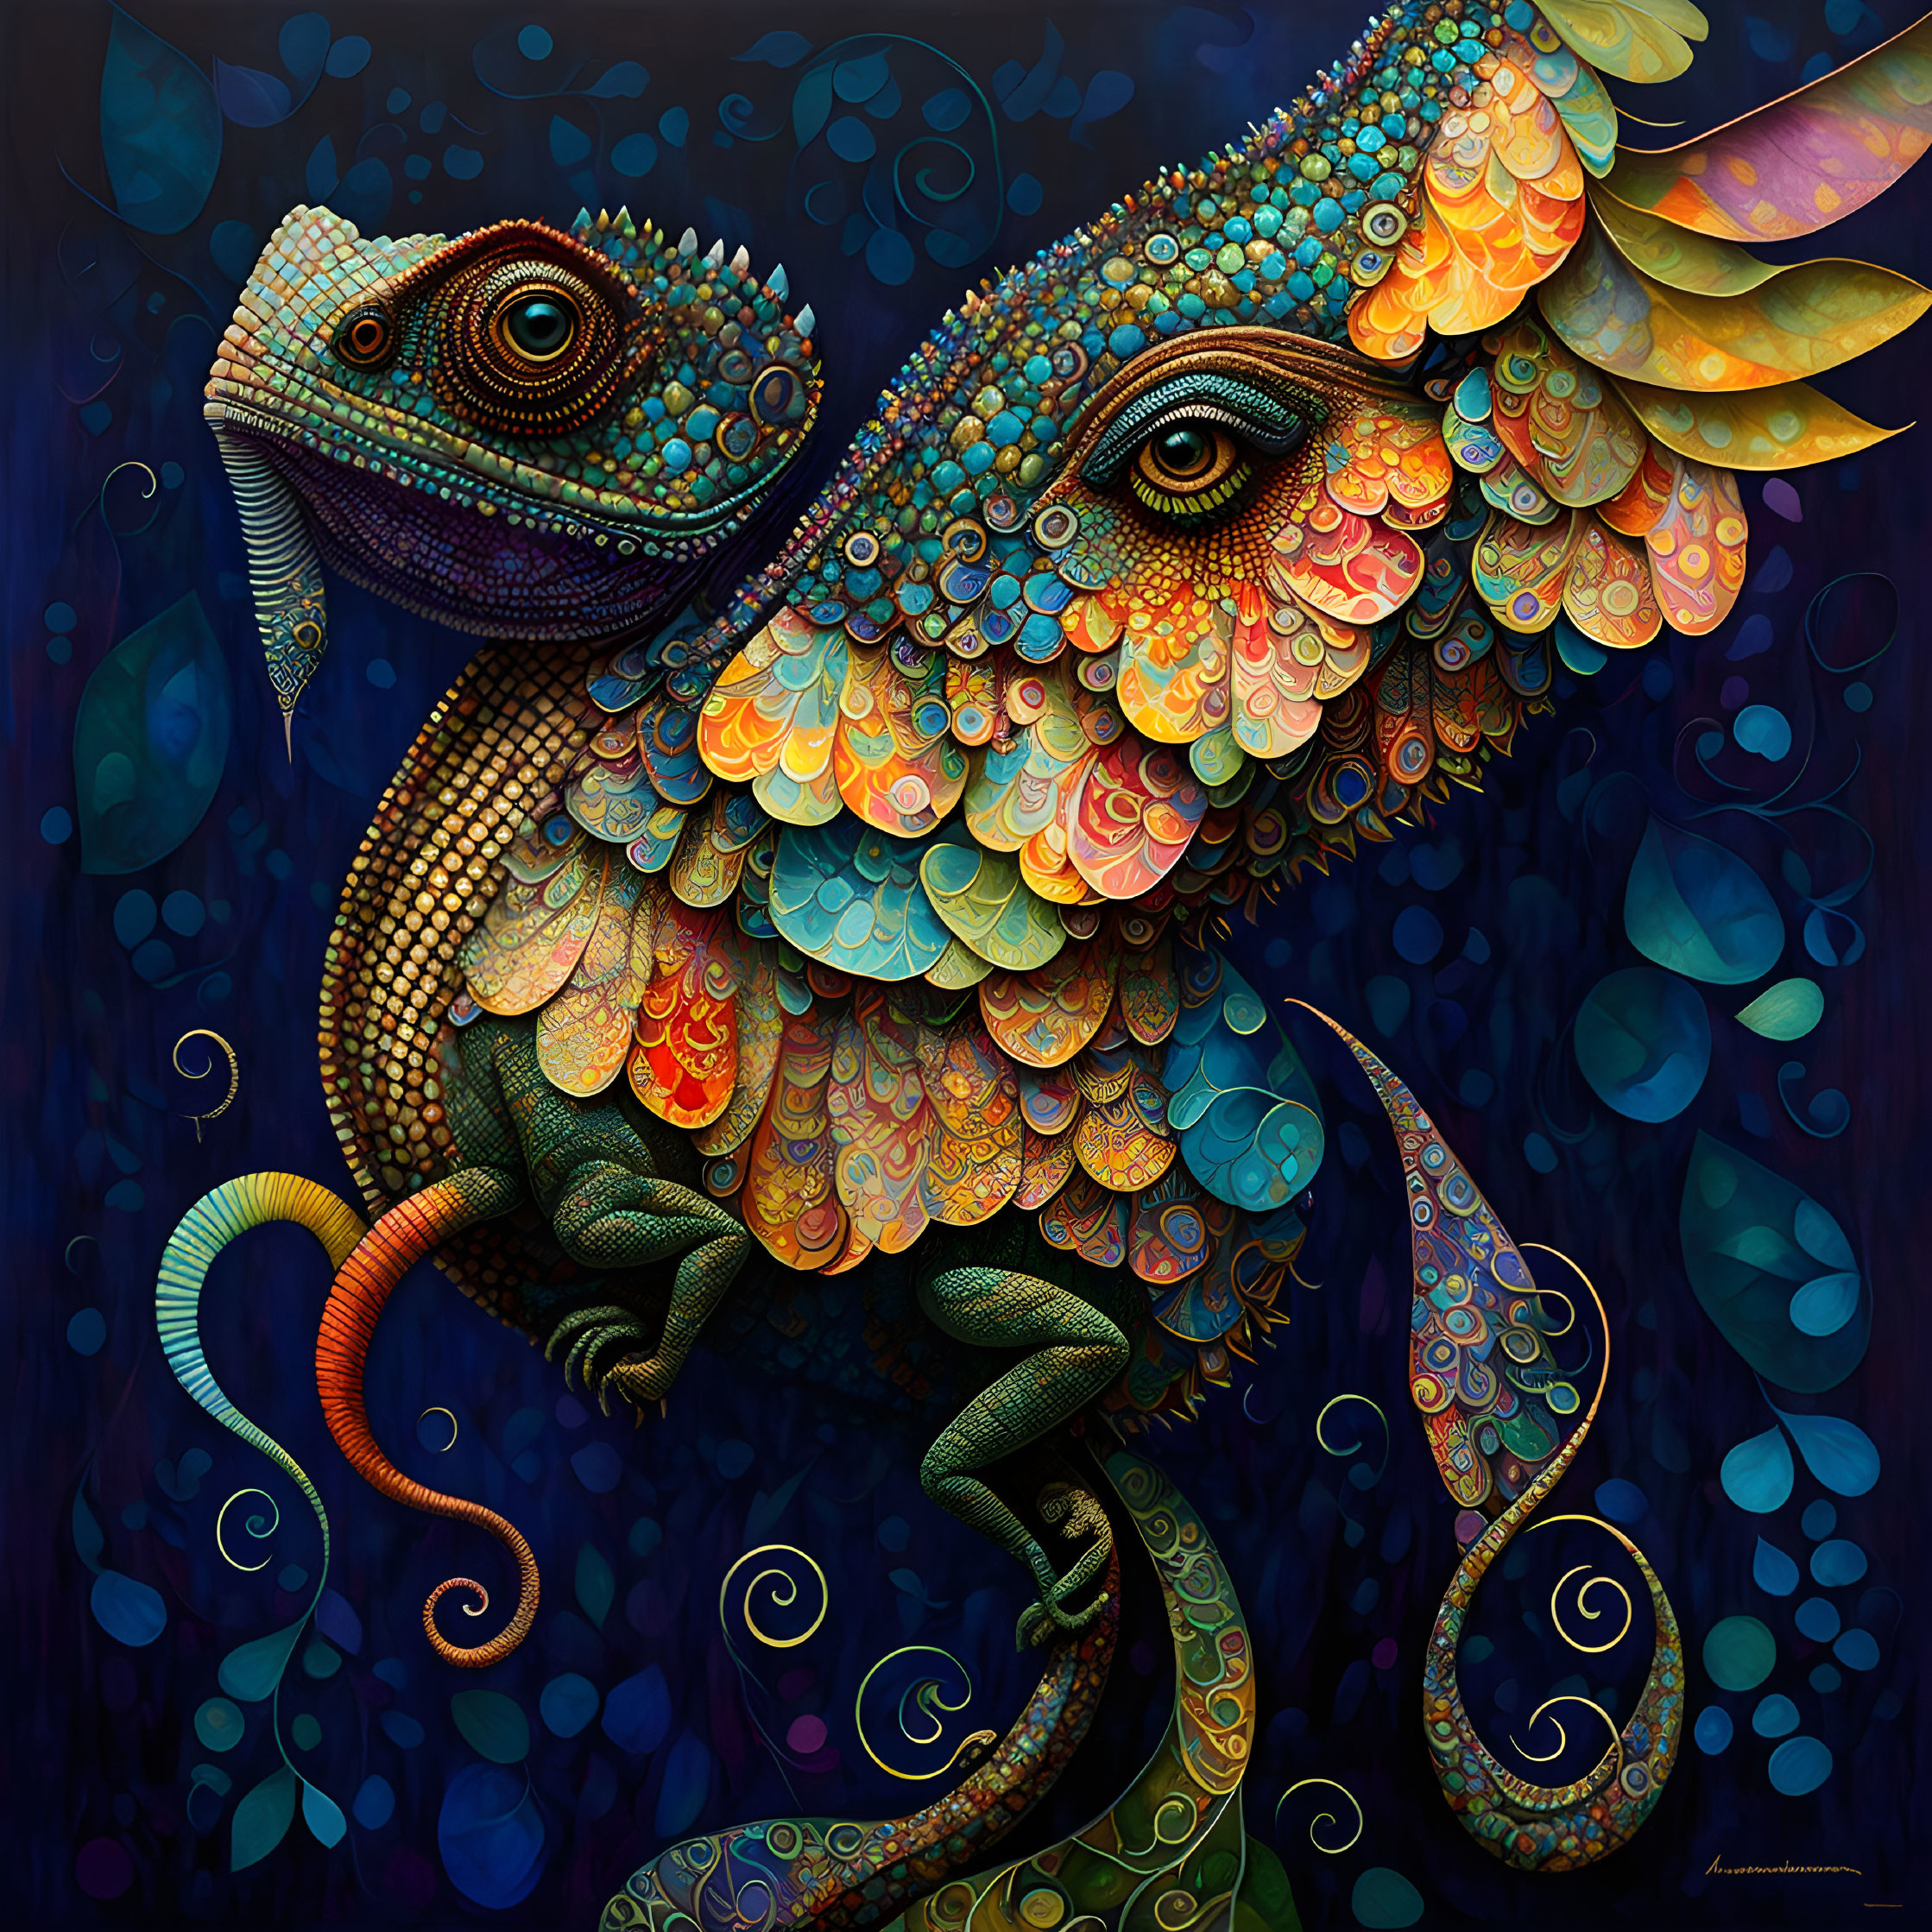 Colorful Chameleon Artwork on Dark Blue Background with Bubbles